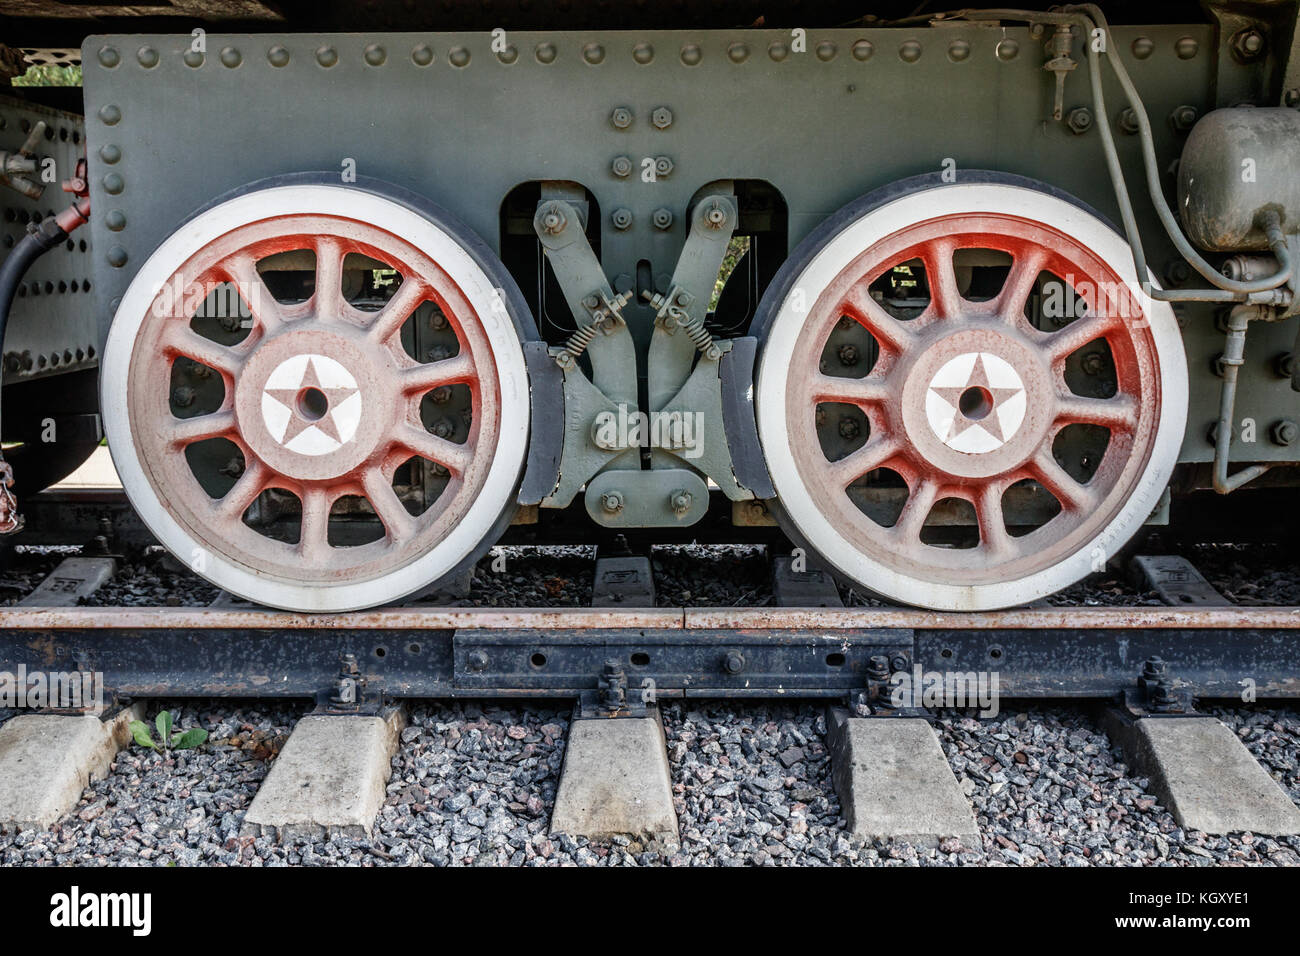 Green frame of a wagon with red spoke wheels on a track. Stock Photo